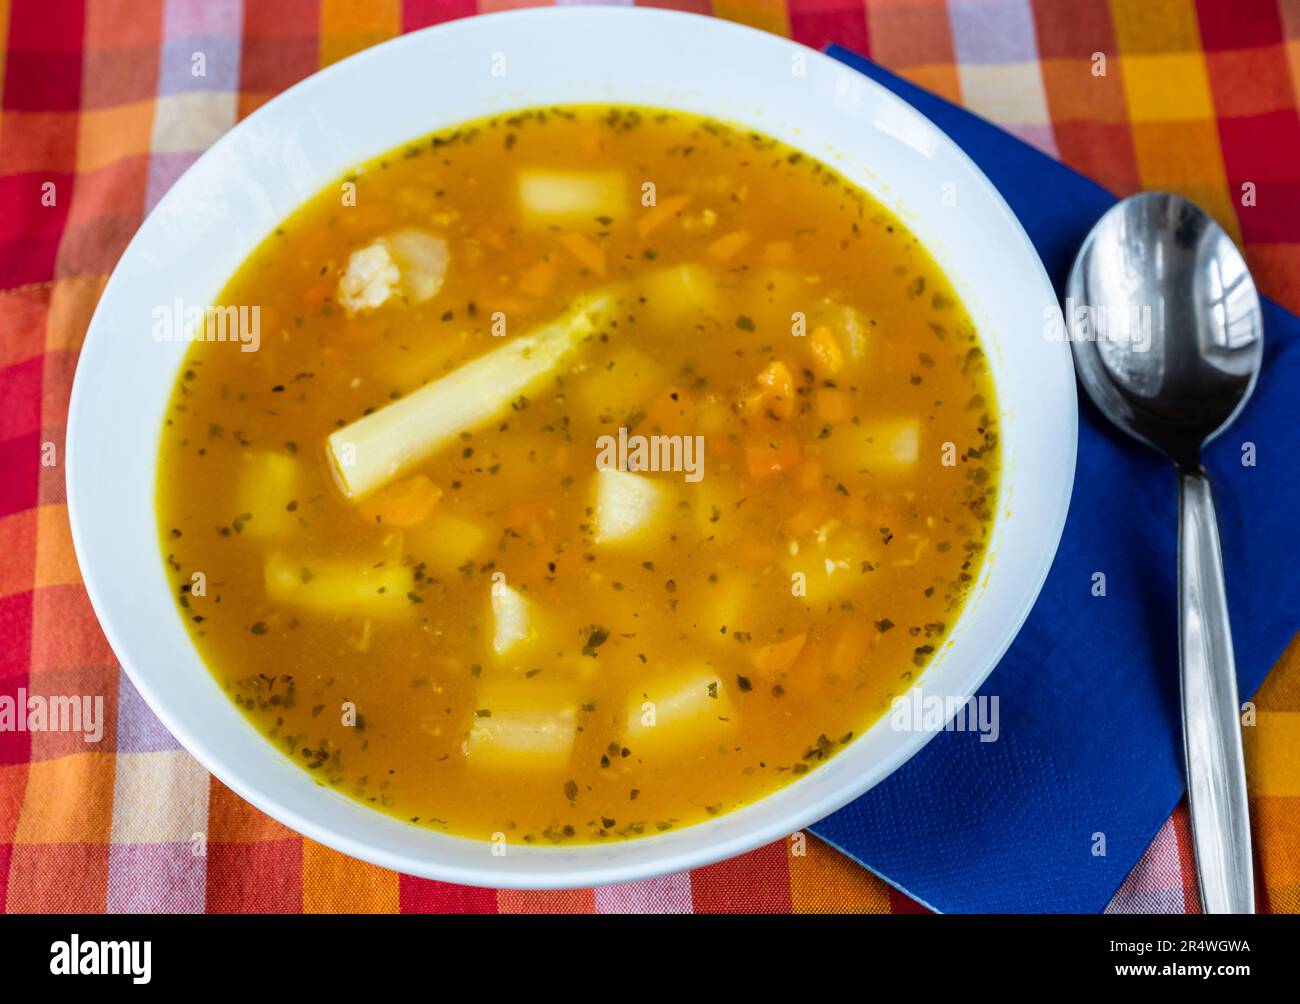 Vegetable soup with asparagus, potato, celery and carrot in white plate, spoon,blue napkin and colorful checkered tablecloth, closeup. Stock Photo